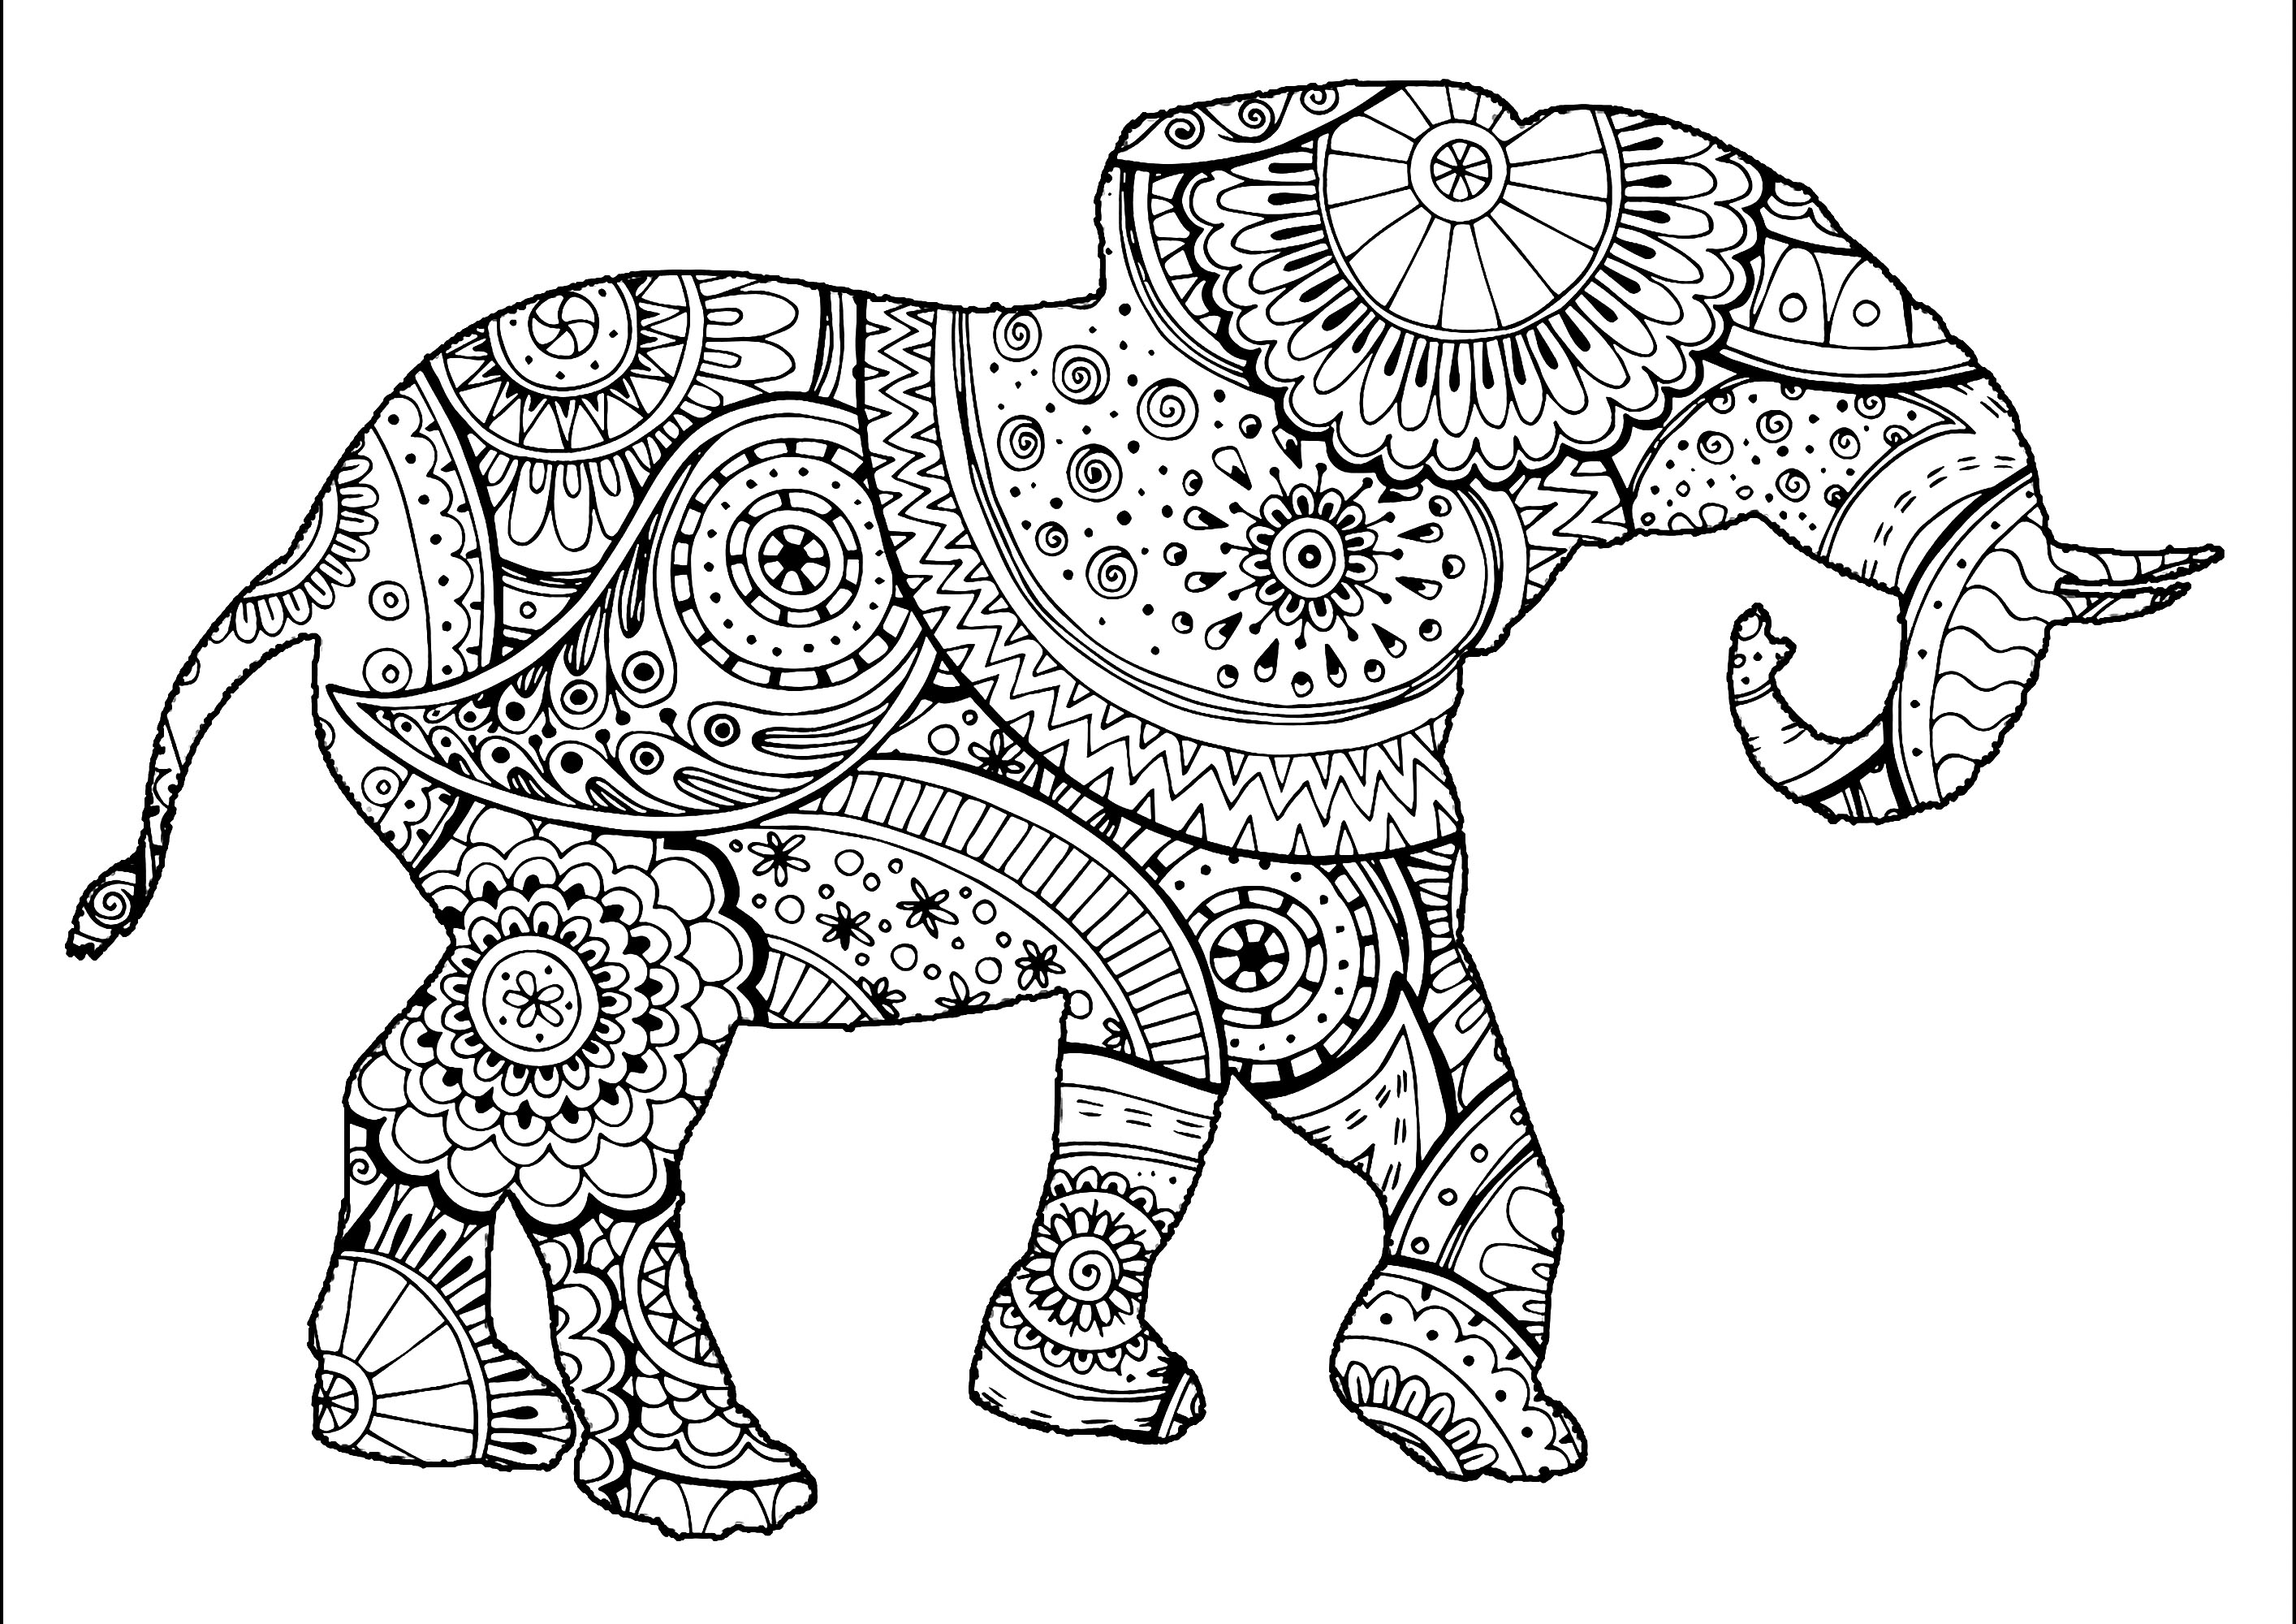 Colouring elephant with Zentangle and Paisley motifs. The Zentangle and Paisley motifs making up this elephant silhouette are highly detailed and varied. Explore them by varying the colors.You can give free rein to your imagination and create highly original color and pattern combinations, Artist : Art. Isabelle